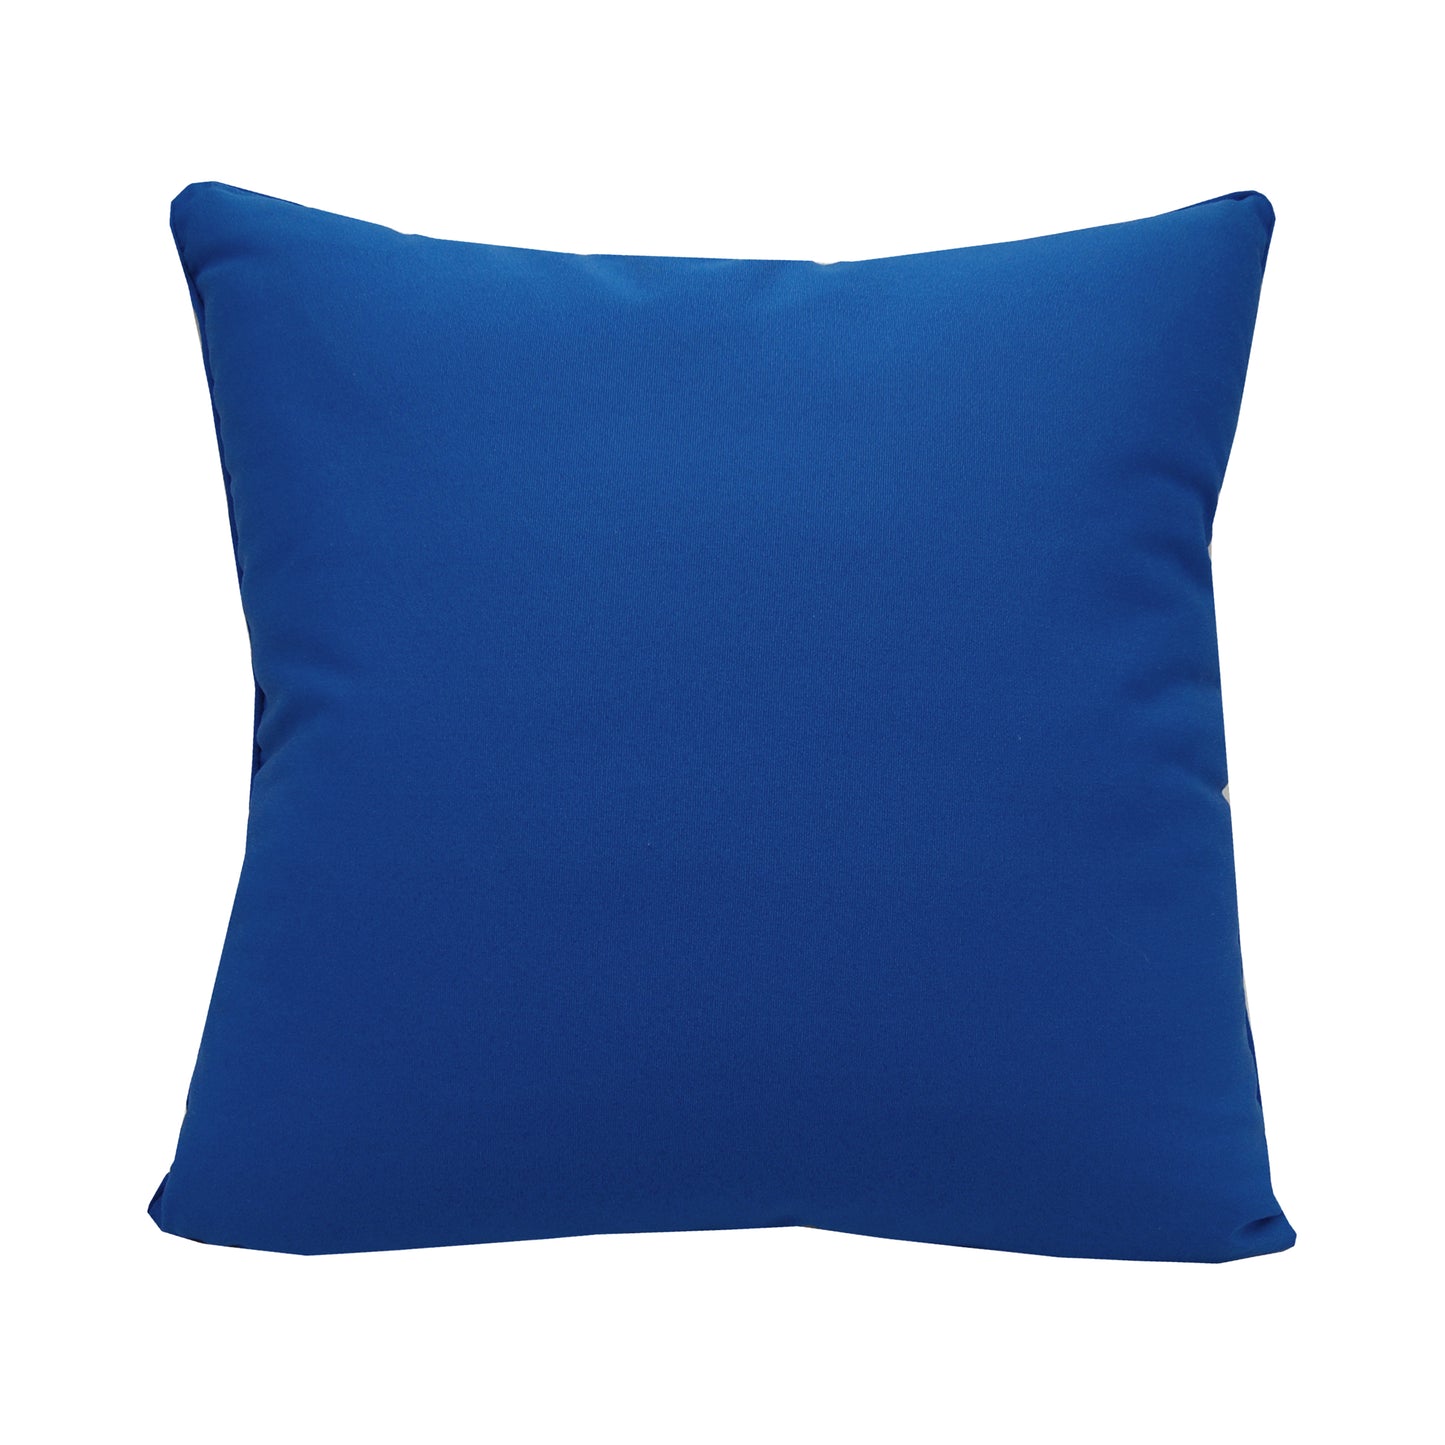 Solid blue fabric; back side of the Blue Puffer Indoor Outdoor Pillow.